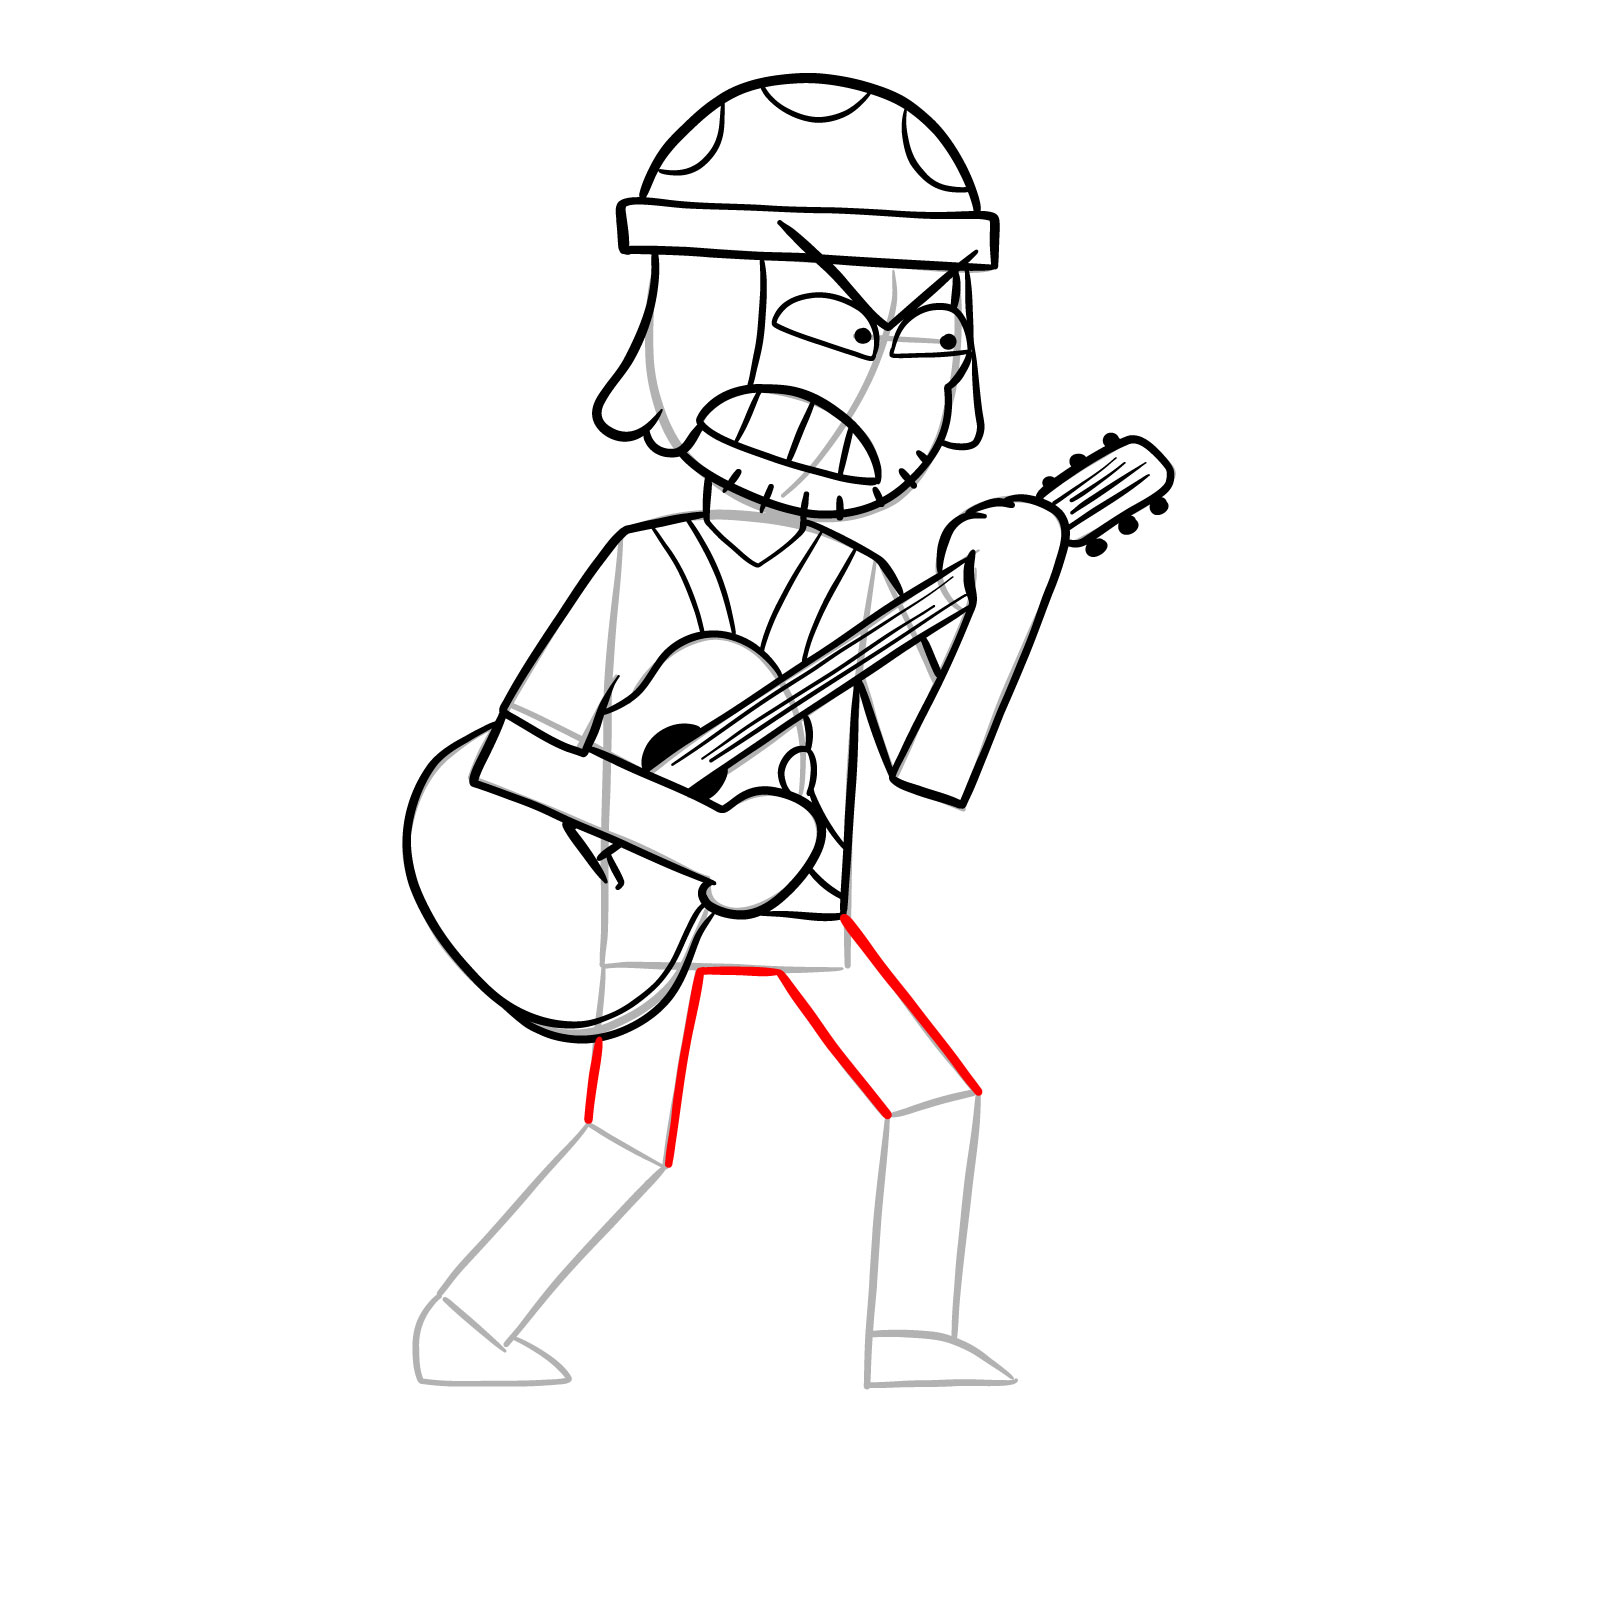 How to draw Suction Cup Man with a guitar - step 22